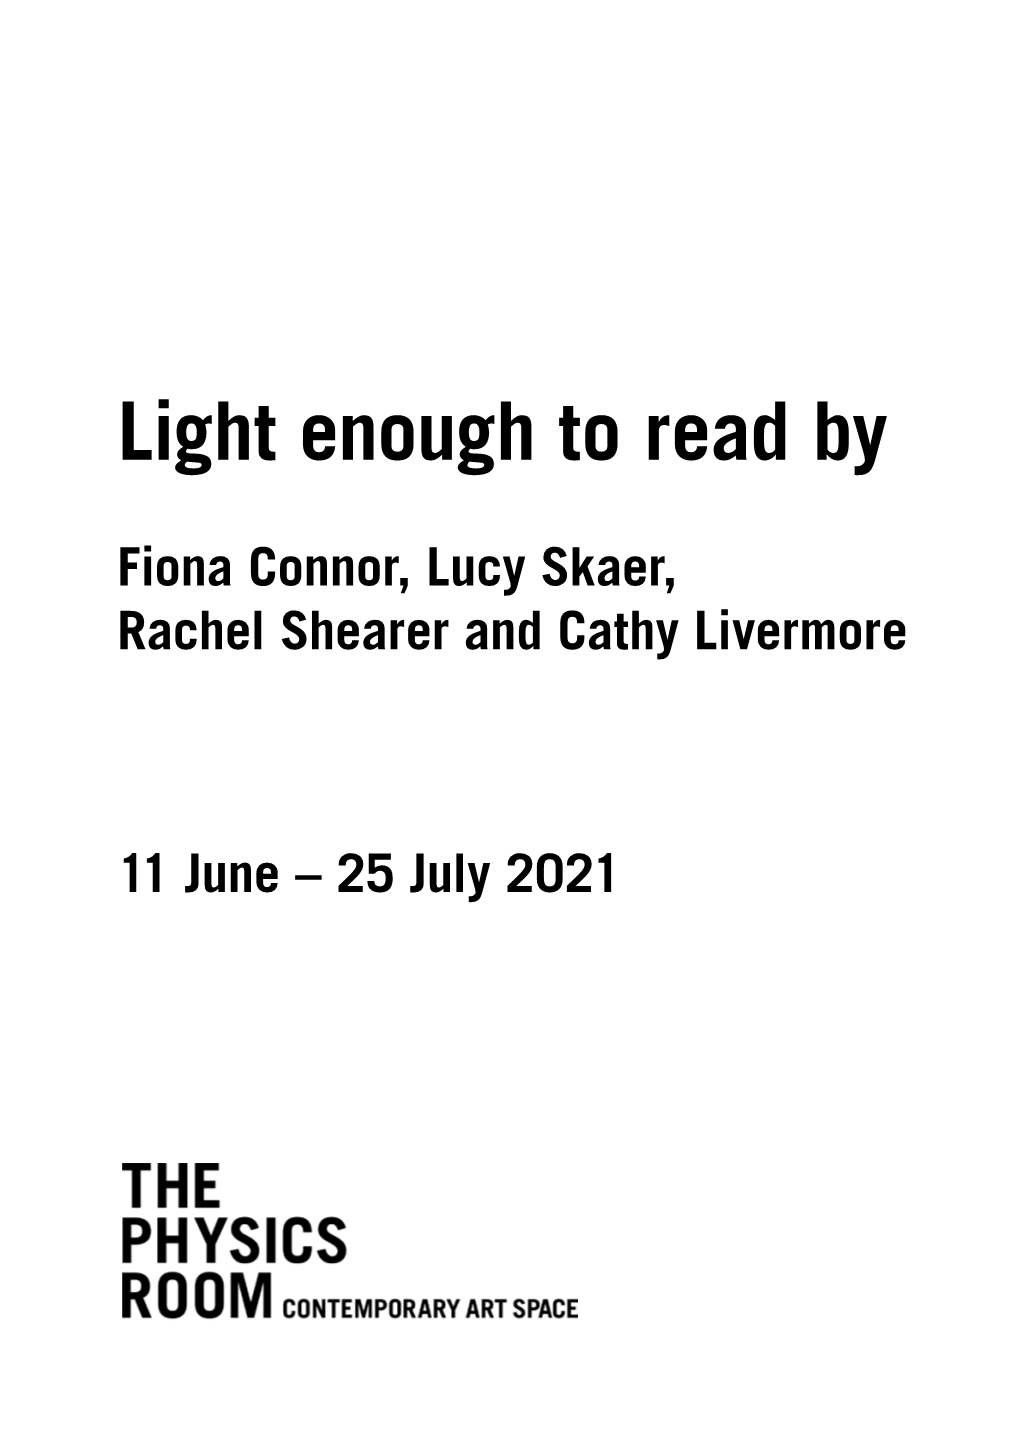 Light Enough to Read by Fiona Connor, Lucy Skaer, Rachel Shearer and Cathy Livermore